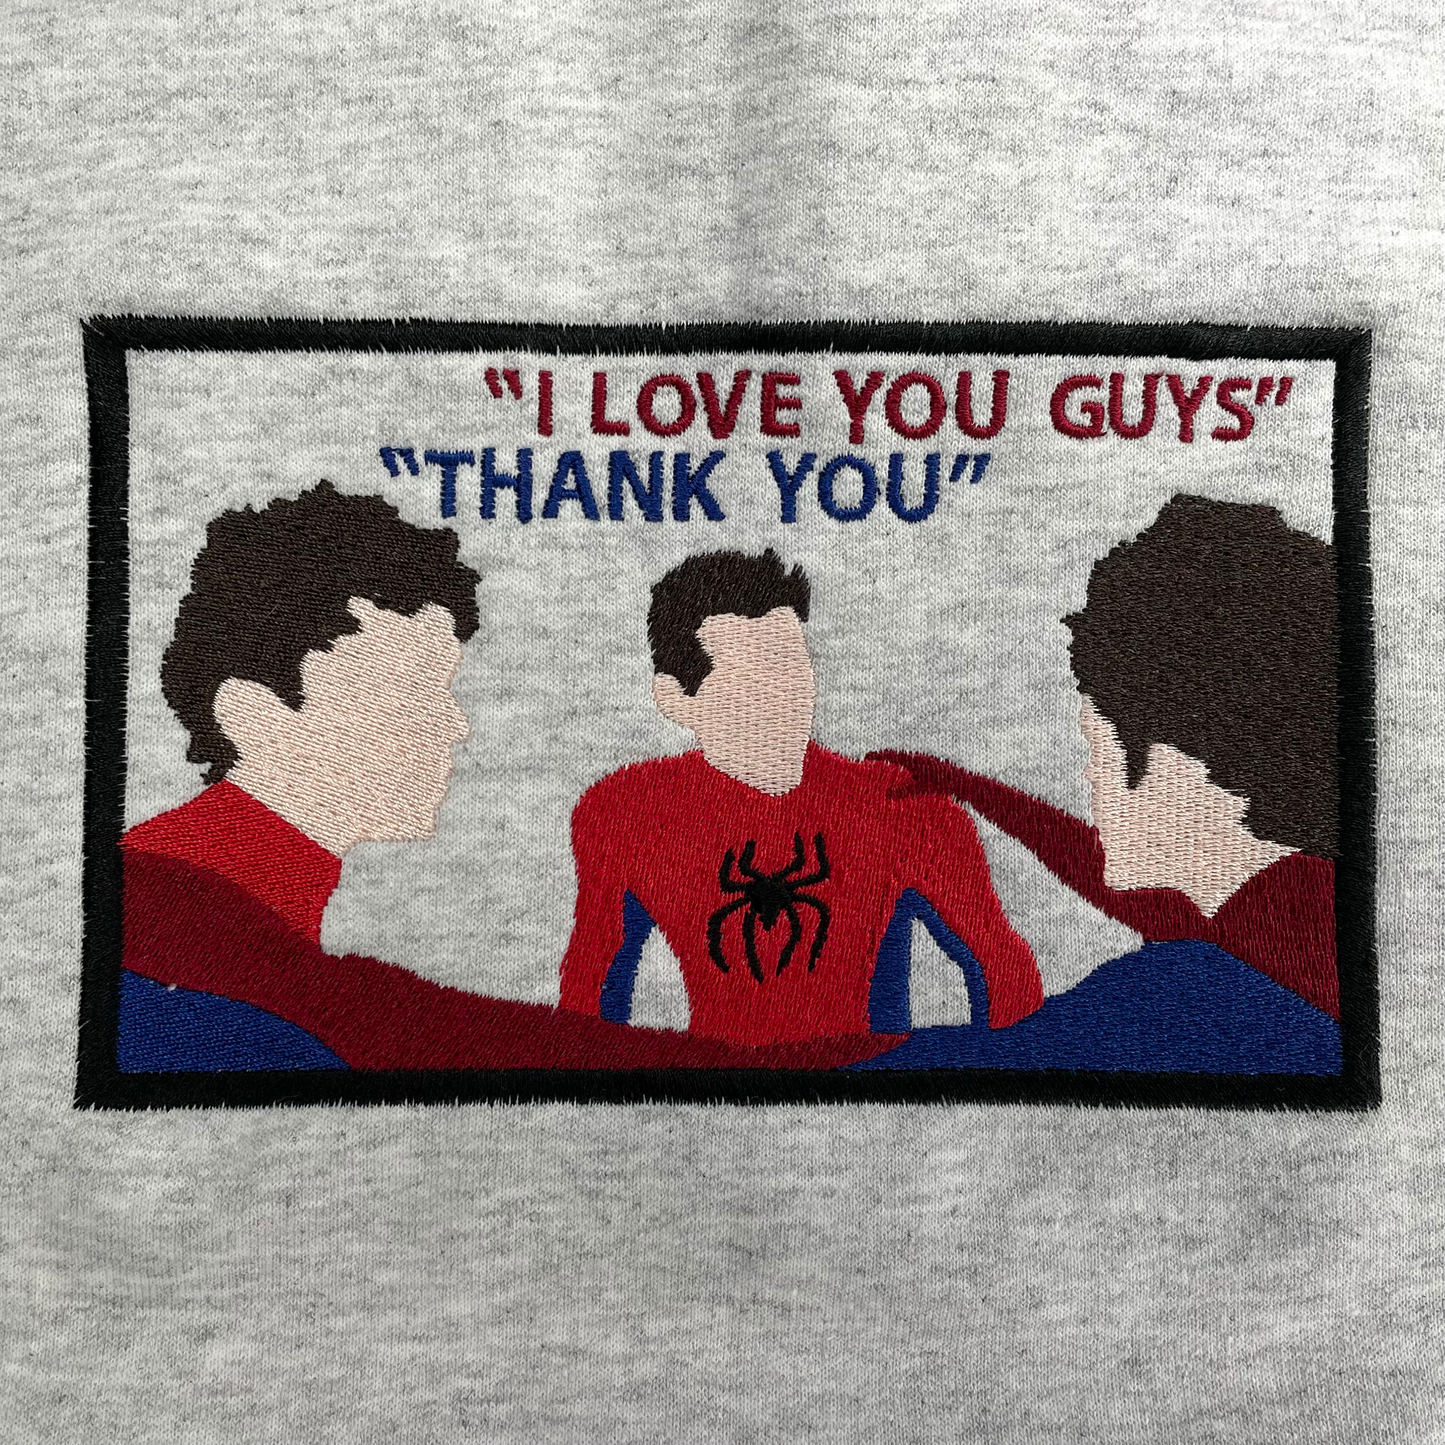 Spiderman "I LOVE YOU GUYS" "THANK YOU" Embroidered Crewneck